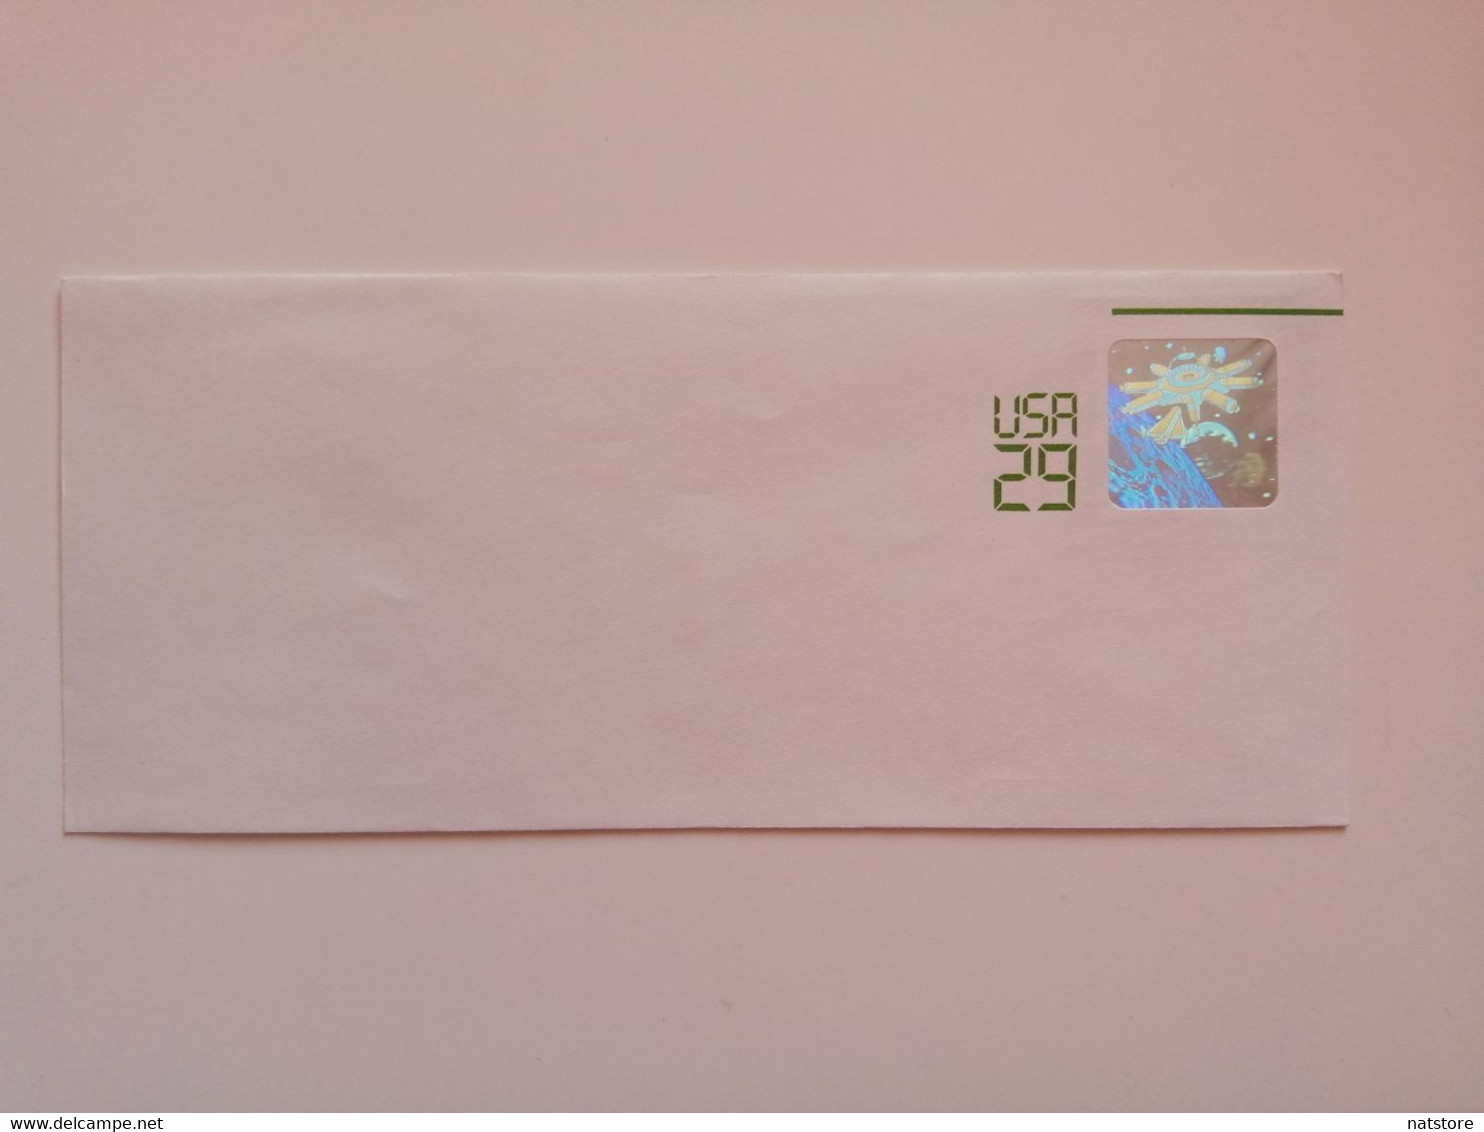 1989.USA..COVER WITH HOLOGRAM STAMP.. NEW - North  America